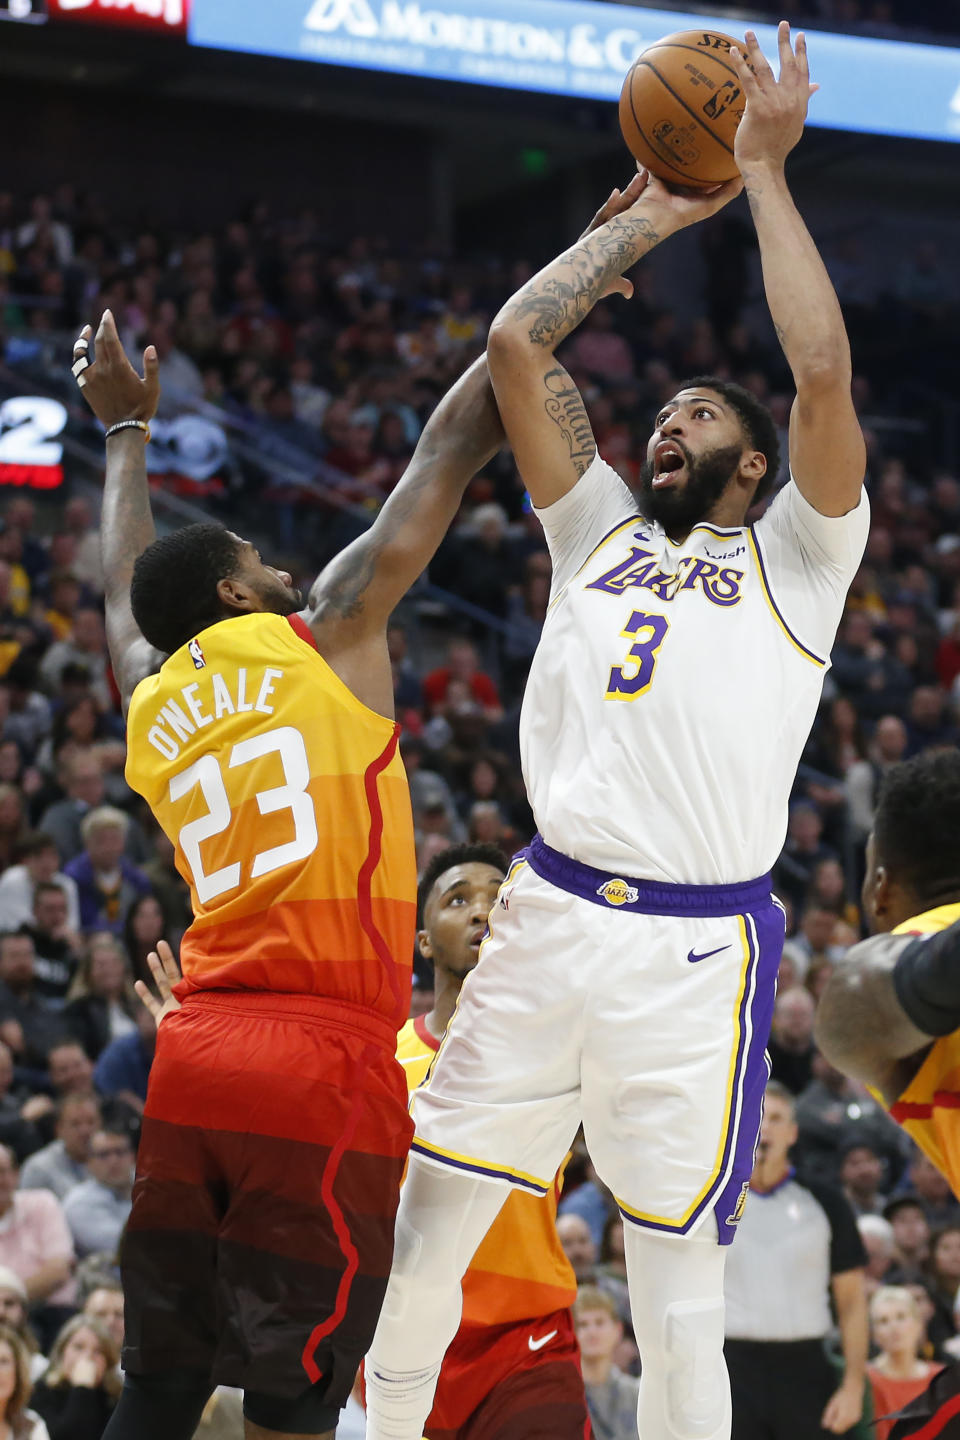 Los Angeles Lakers forward Anthony Davis (3) shoots as Utah Jazz forward Royce O'Neale (23) defends in the first half during an NBA basketball game Wednesday, Dec. 4, 2019, in Salt Lake City. (AP Photo/Rick Bowmer)